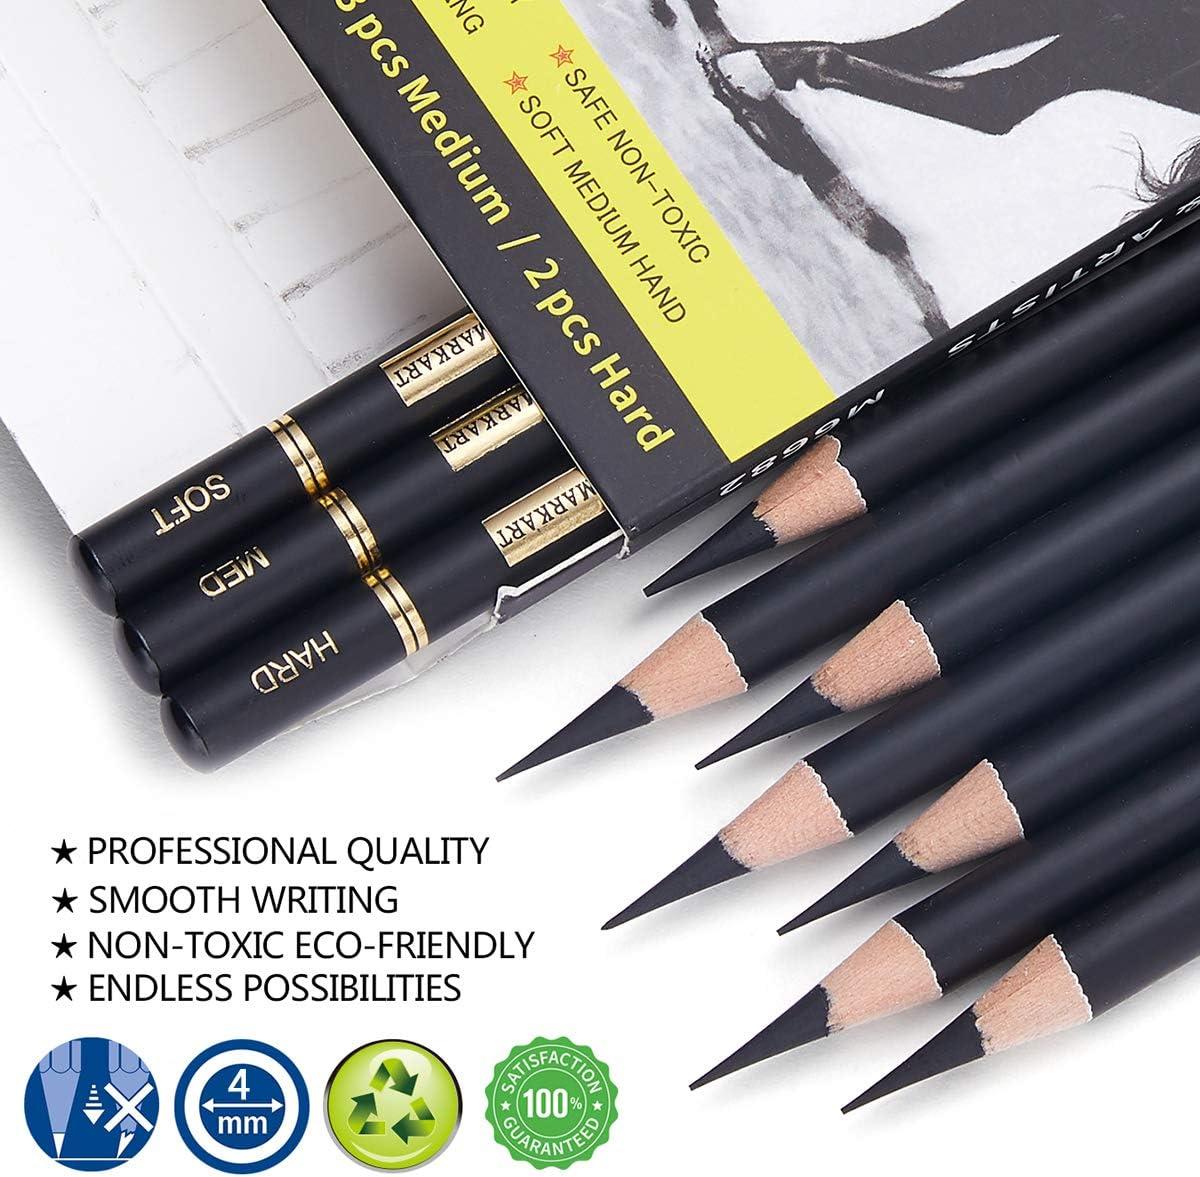 Professional Drawing Set - MARKART 10 Pieces Soft Medium and Hard Charcoal  Pencils for Drawing, Sketching, Shading, Pencils for Beginners & Artists  Black